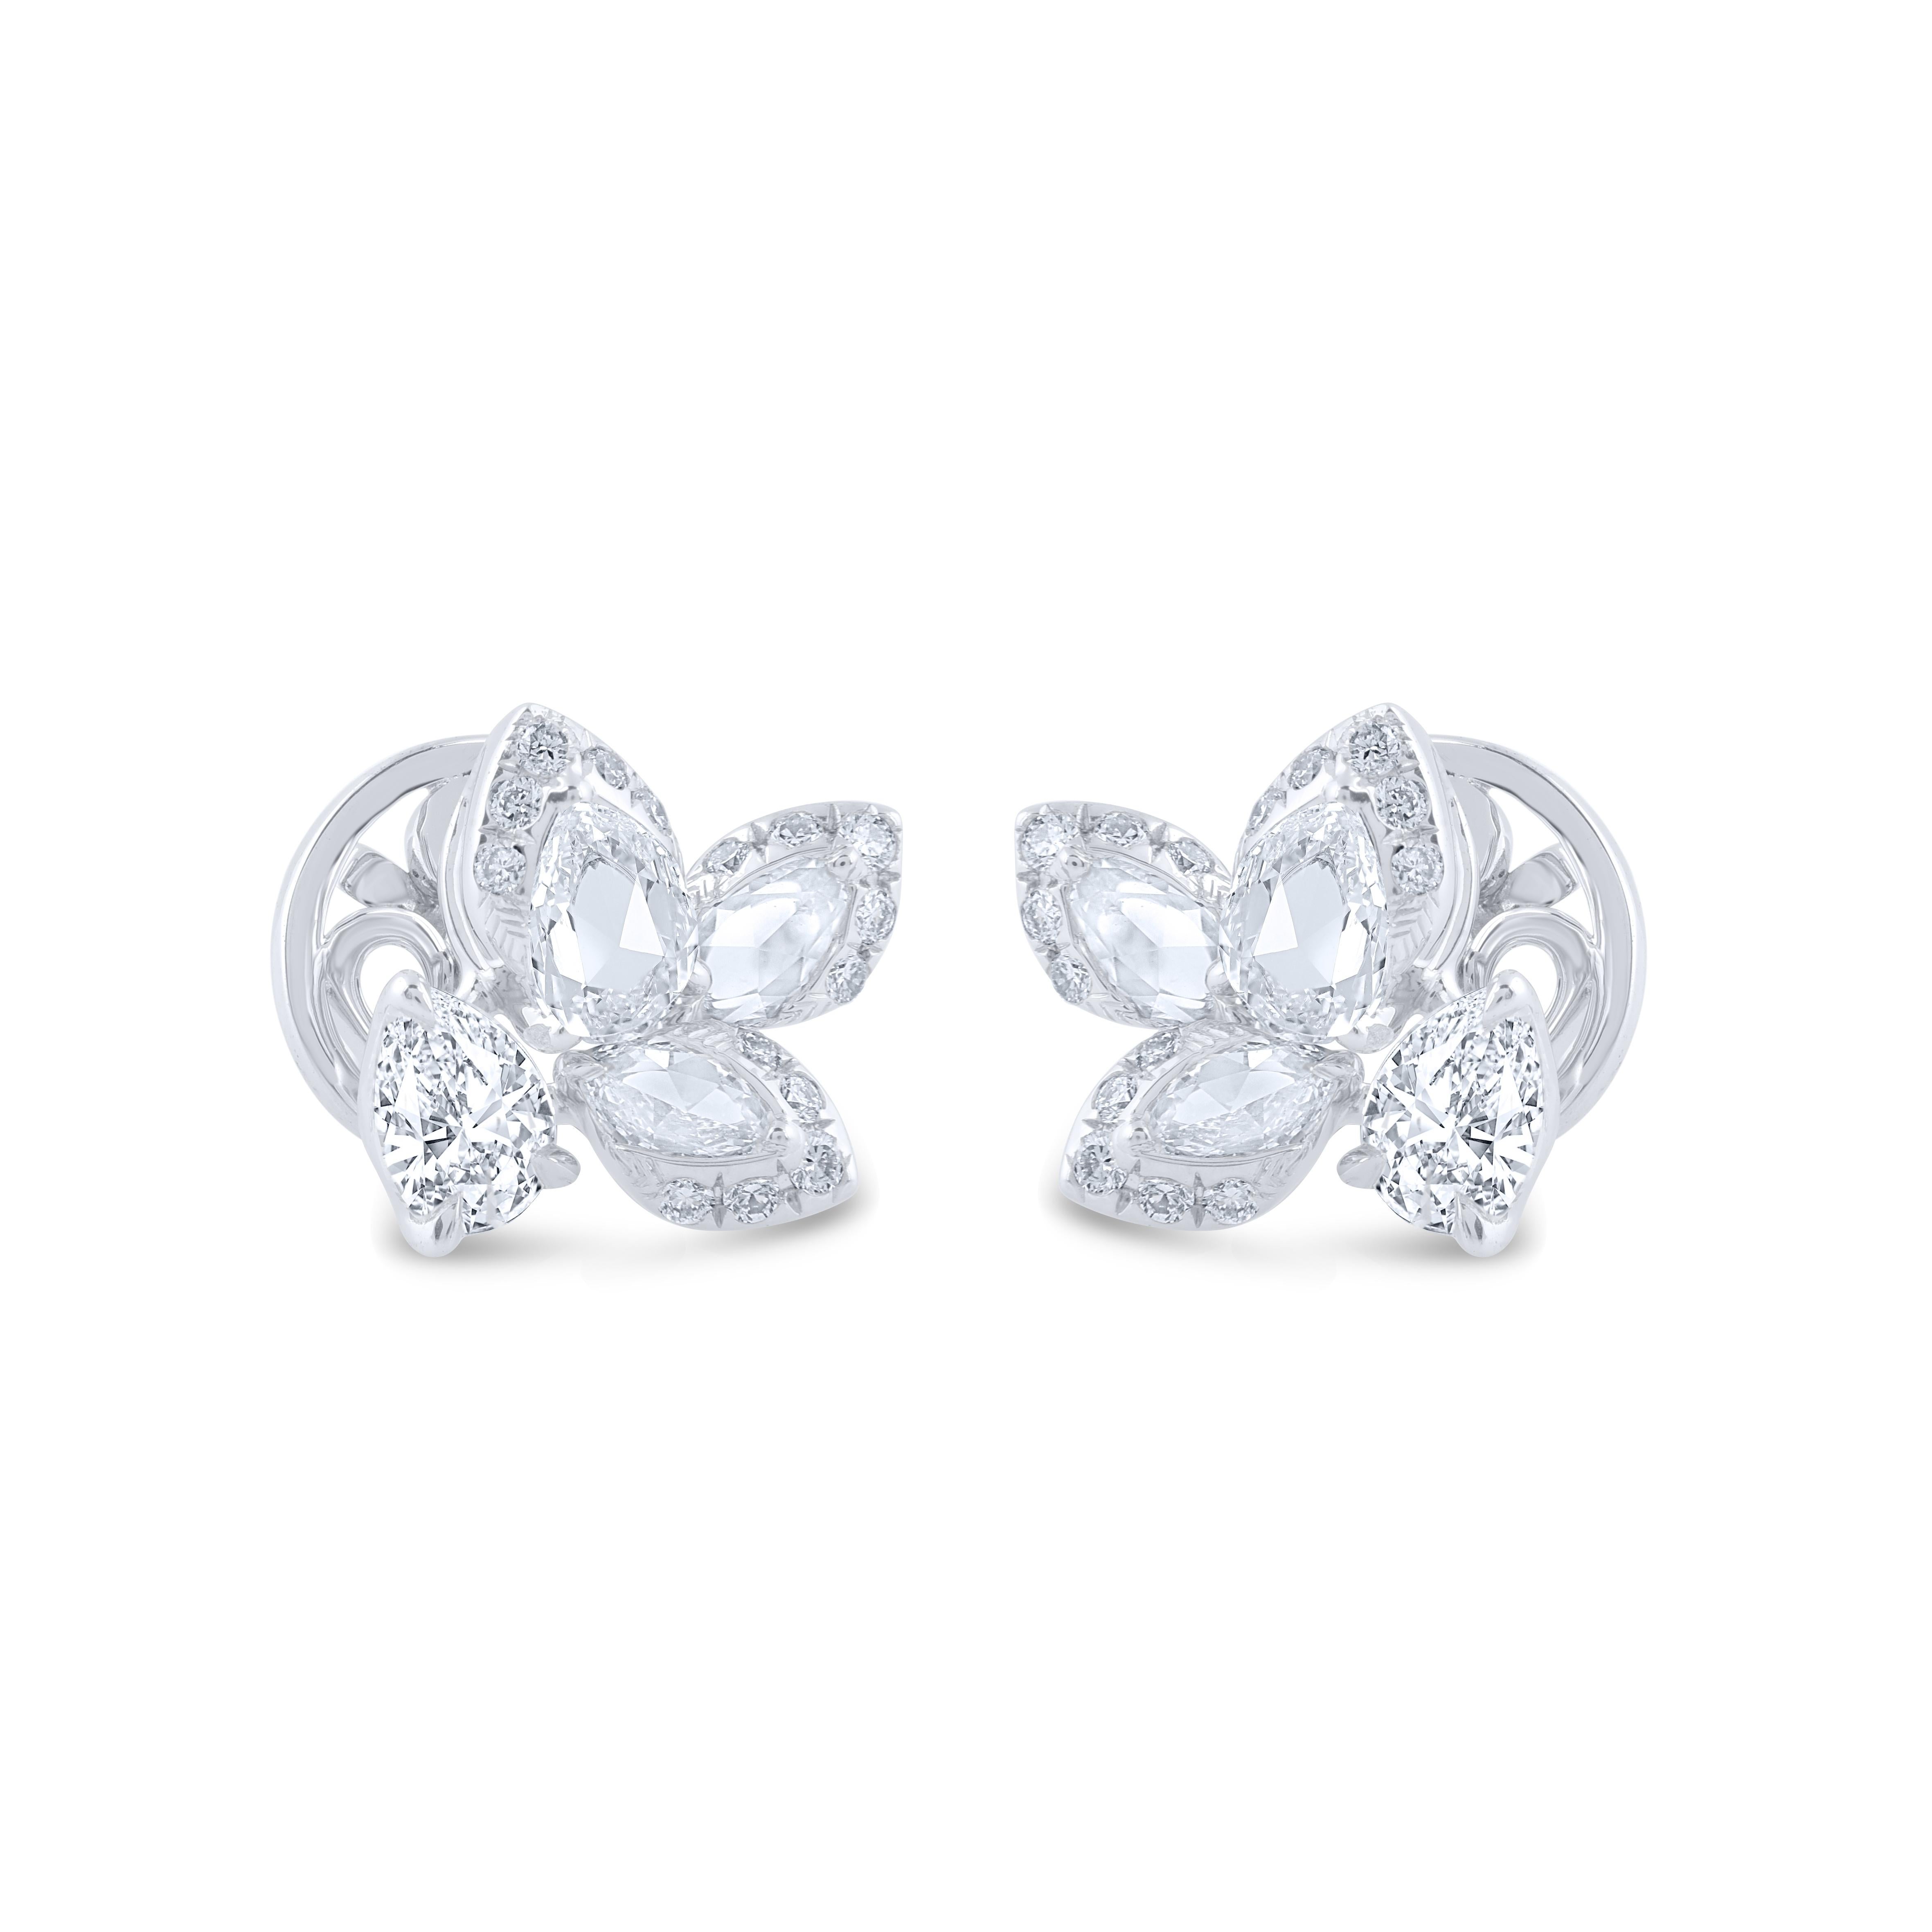 Beautiful stud earrings from our Cascade collection, featuring 38 D-F color, IF-VS clarity diamonds. 
It has 30 round diamonds, 2 pear, 2 rose cut pear and 2 rose cut marquise diamonds. The total diamond weight 0.50 CT and these earrings are